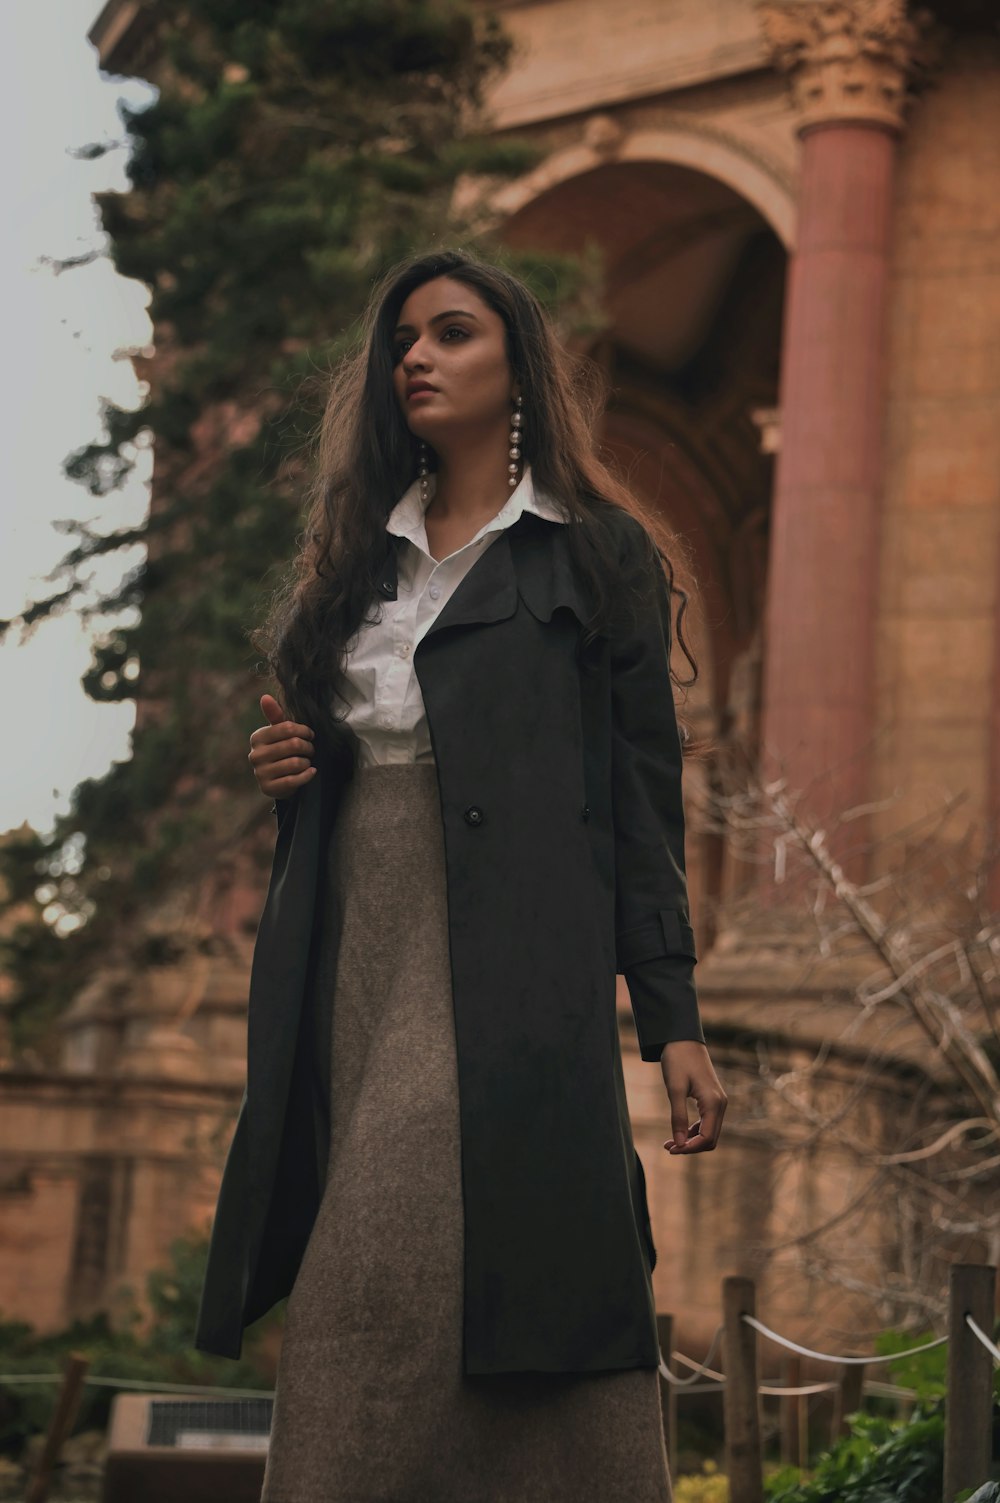 woman in black coat standing on brown wooden pathway during daytime